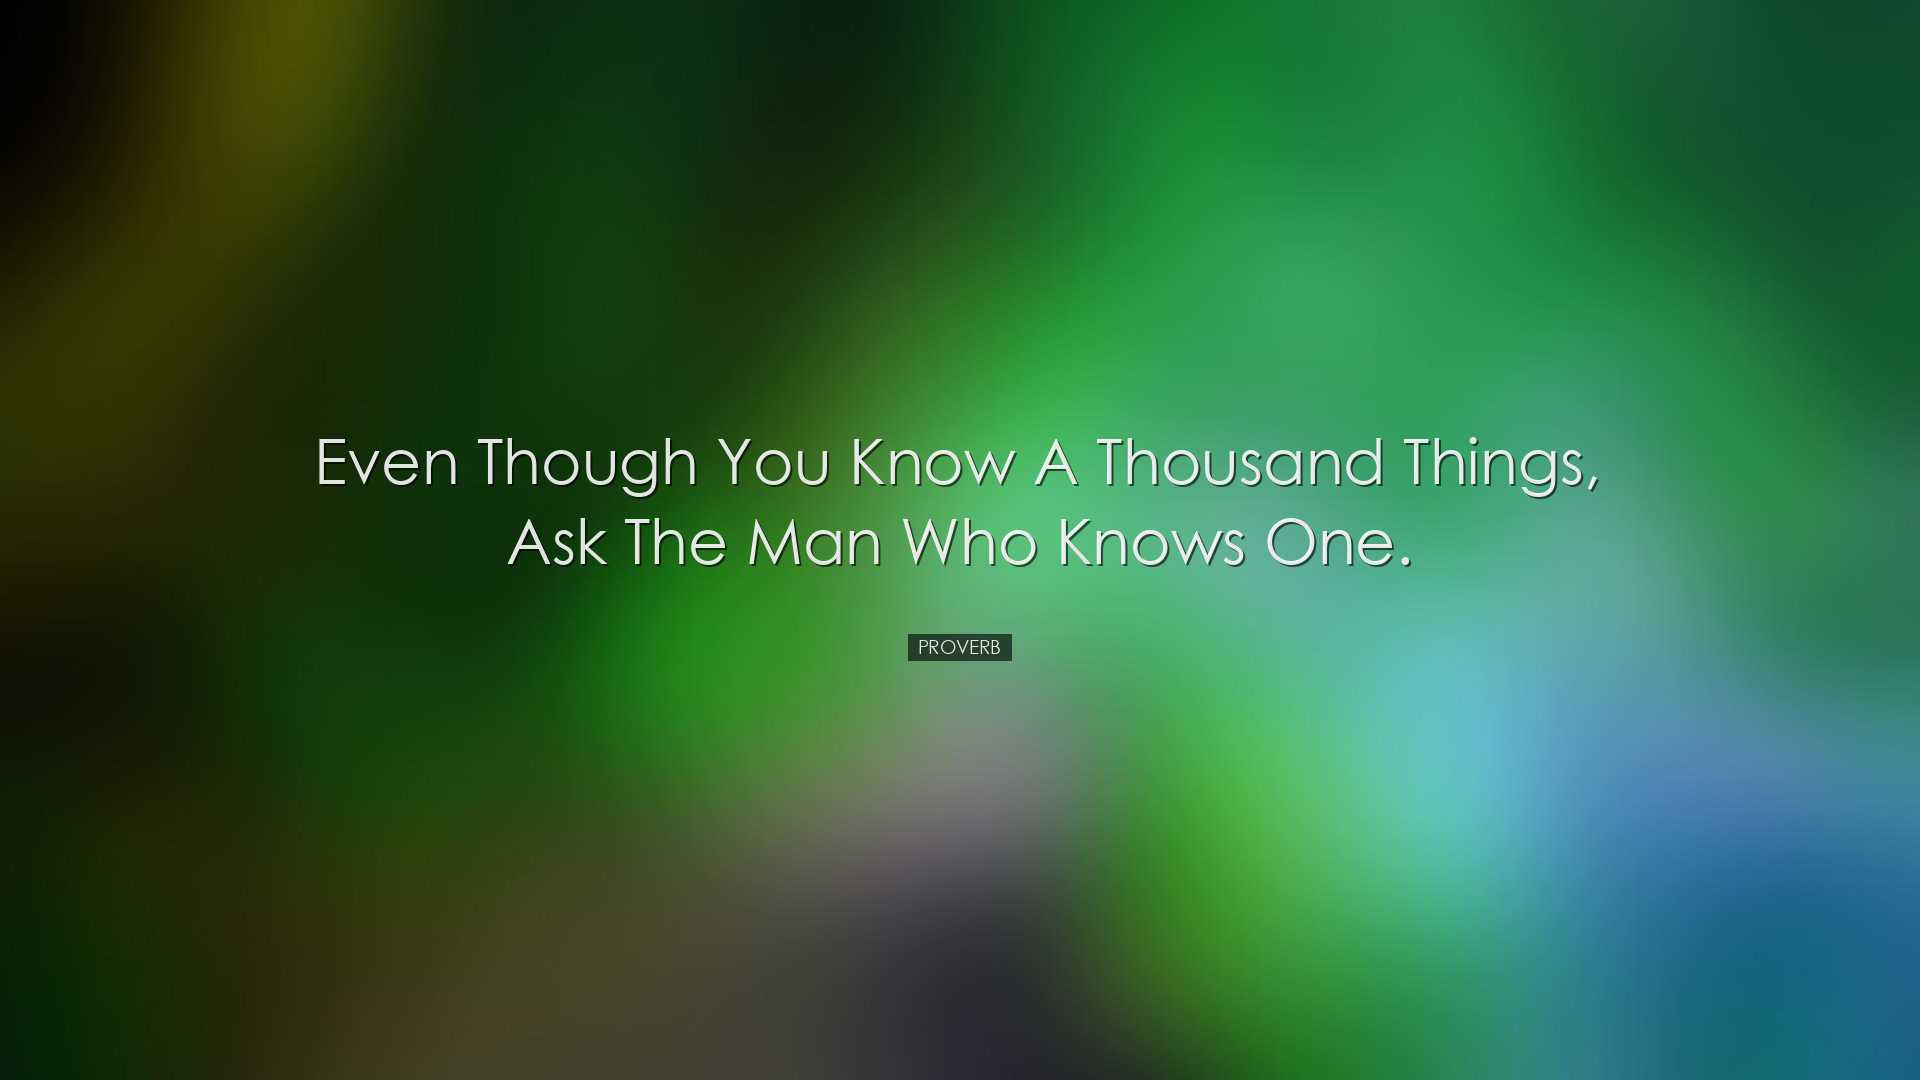 Even though you know a thousand things, ask the man who knows one.